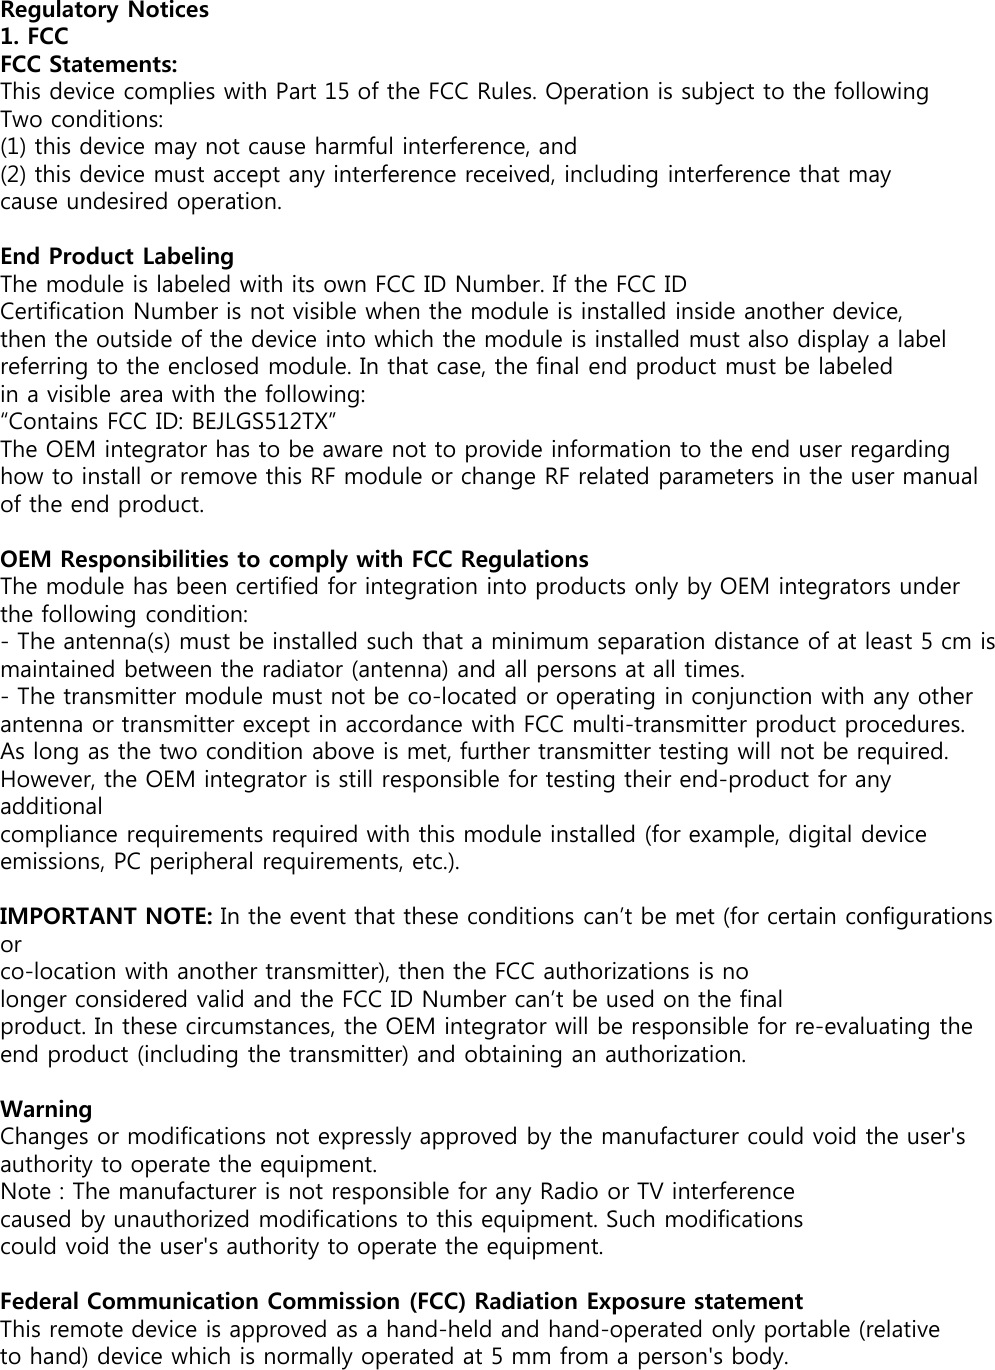 Regulatory Notices1. FCCFCC Statements:This device complies with Part 15 of the FCC Rules. Operation is subject to the following Two conditions:(1) this device may not cause harmful interference, and(2) this device must accept any interference received, including interference that maycause undesired operation.End Product LabelingThe module is labeled with its own FCC ID Number. If the FCC IDCertification Number is not visible when the module is installed inside another device, then the outside of the device into which the module is installed must also display a label referring to the enclosed module. In that case, the final end product must be labeled in a visible area with the following:“Contains FCC ID: BEJLGS512TX”The OEM integrator has to be aware not to provide information to the end user regarding how to install or remove this RF module or change RF related parameters in the user manual of the end product.OEM Responsibilities to comply with FCC RegulationsThe module has been certified for integration into products only by OEM integrators under the following condition:- The antenna(s) must be installed such that a minimum separation distance of at least 5 cm ismaintained between the radiator (antenna) and all persons at all times.- The transmitter module must not be co-located or operating in conjunction with any otherantenna or transmitter except in accordance with FCC multi-transmitter product procedures.As long as the two condition above is met, further transmitter testing will not be required.However, the OEM integrator is still responsible for testing their end-product for any additionalcompliance requirements required with this module installed (for example, digital deviceemissions, PC peripheral requirements, etc.).IMPORTANT NOTE: In the event that these conditions can’t be met (for certain configurations orco-location with another transmitter), then the FCC authorizations is nolonger considered valid and the FCC ID Number can’t be used on the finalproduct. In these circumstances, the OEM integrator will be responsible for re-evaluating the end product (including the transmitter) and obtaining an authorization.WarningChanges or modifications not expressly approved by the manufacturer could void the user&apos;s authority to operate the equipment.Note : The manufacturer is not responsible for any Radio or TV interferencecaused by unauthorized modifications to this equipment. Such modificationscould void the user&apos;s authority to operate the equipment.Federal Communication Commission (FCC) Radiation Exposure statementThis remote device is approved as a hand-held and hand-operated only portable (relative to hand) device which is normally operated at 5 mm from a person&apos;s body.